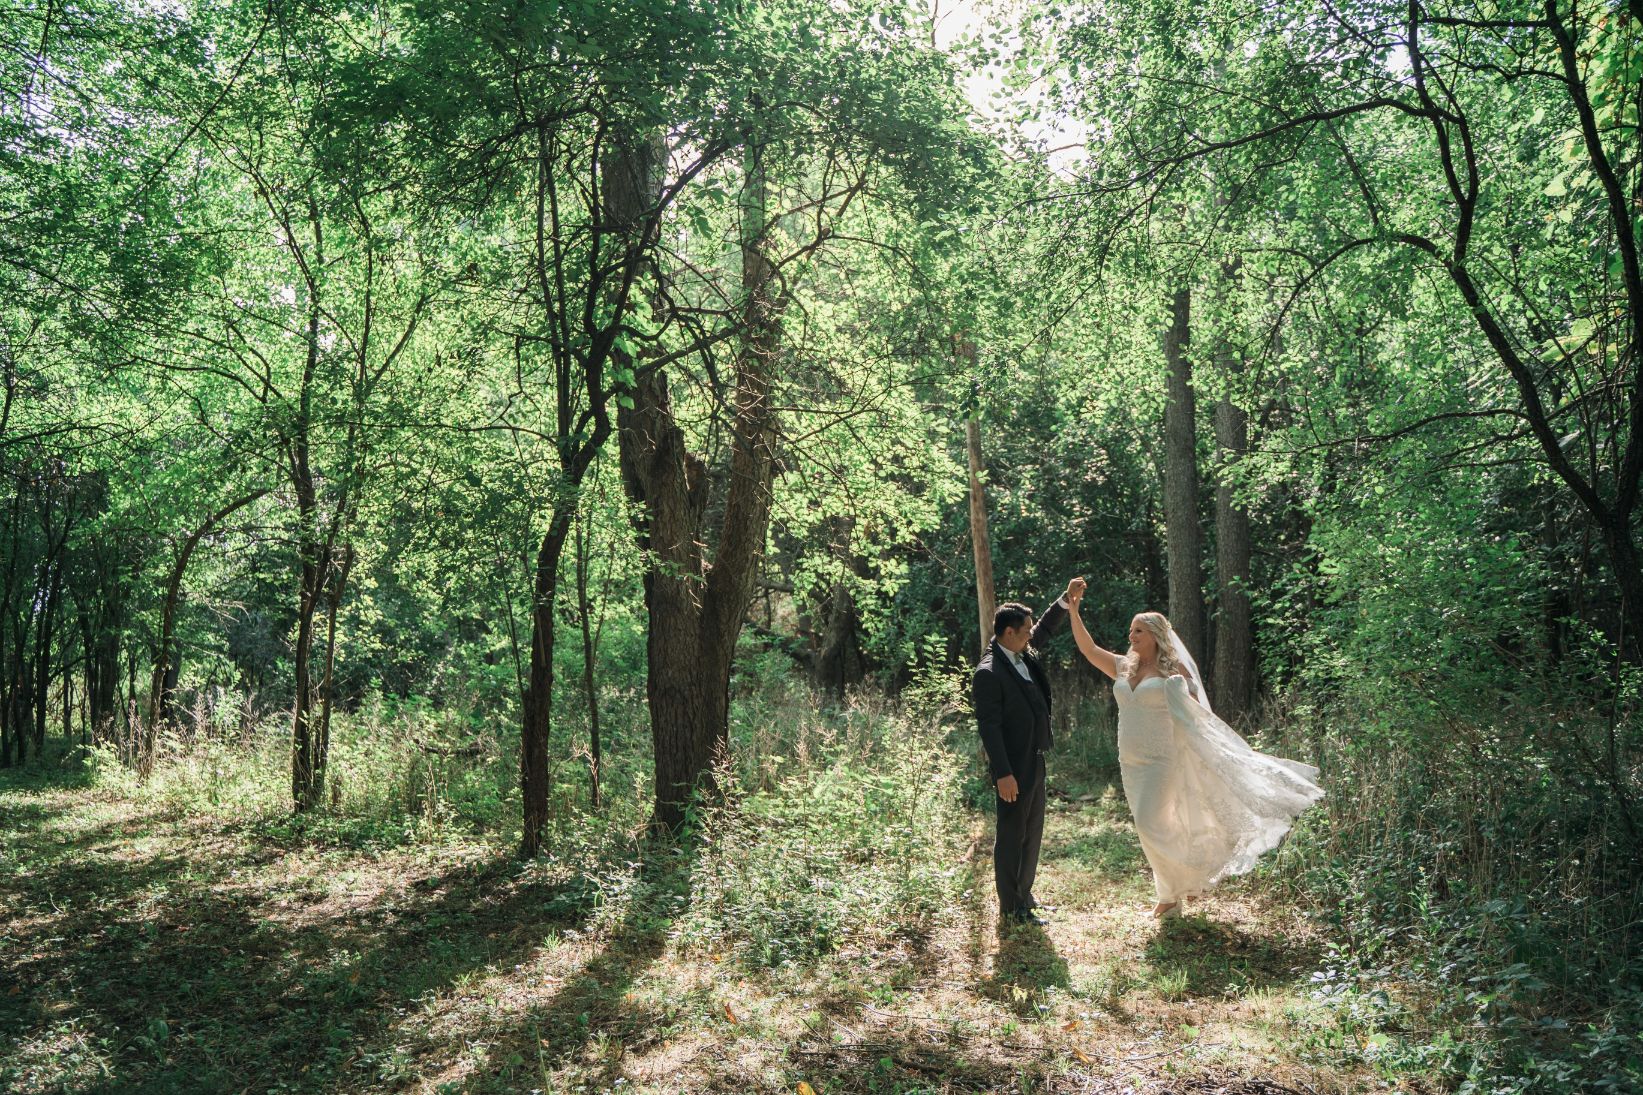 Romantics surrounded by trees